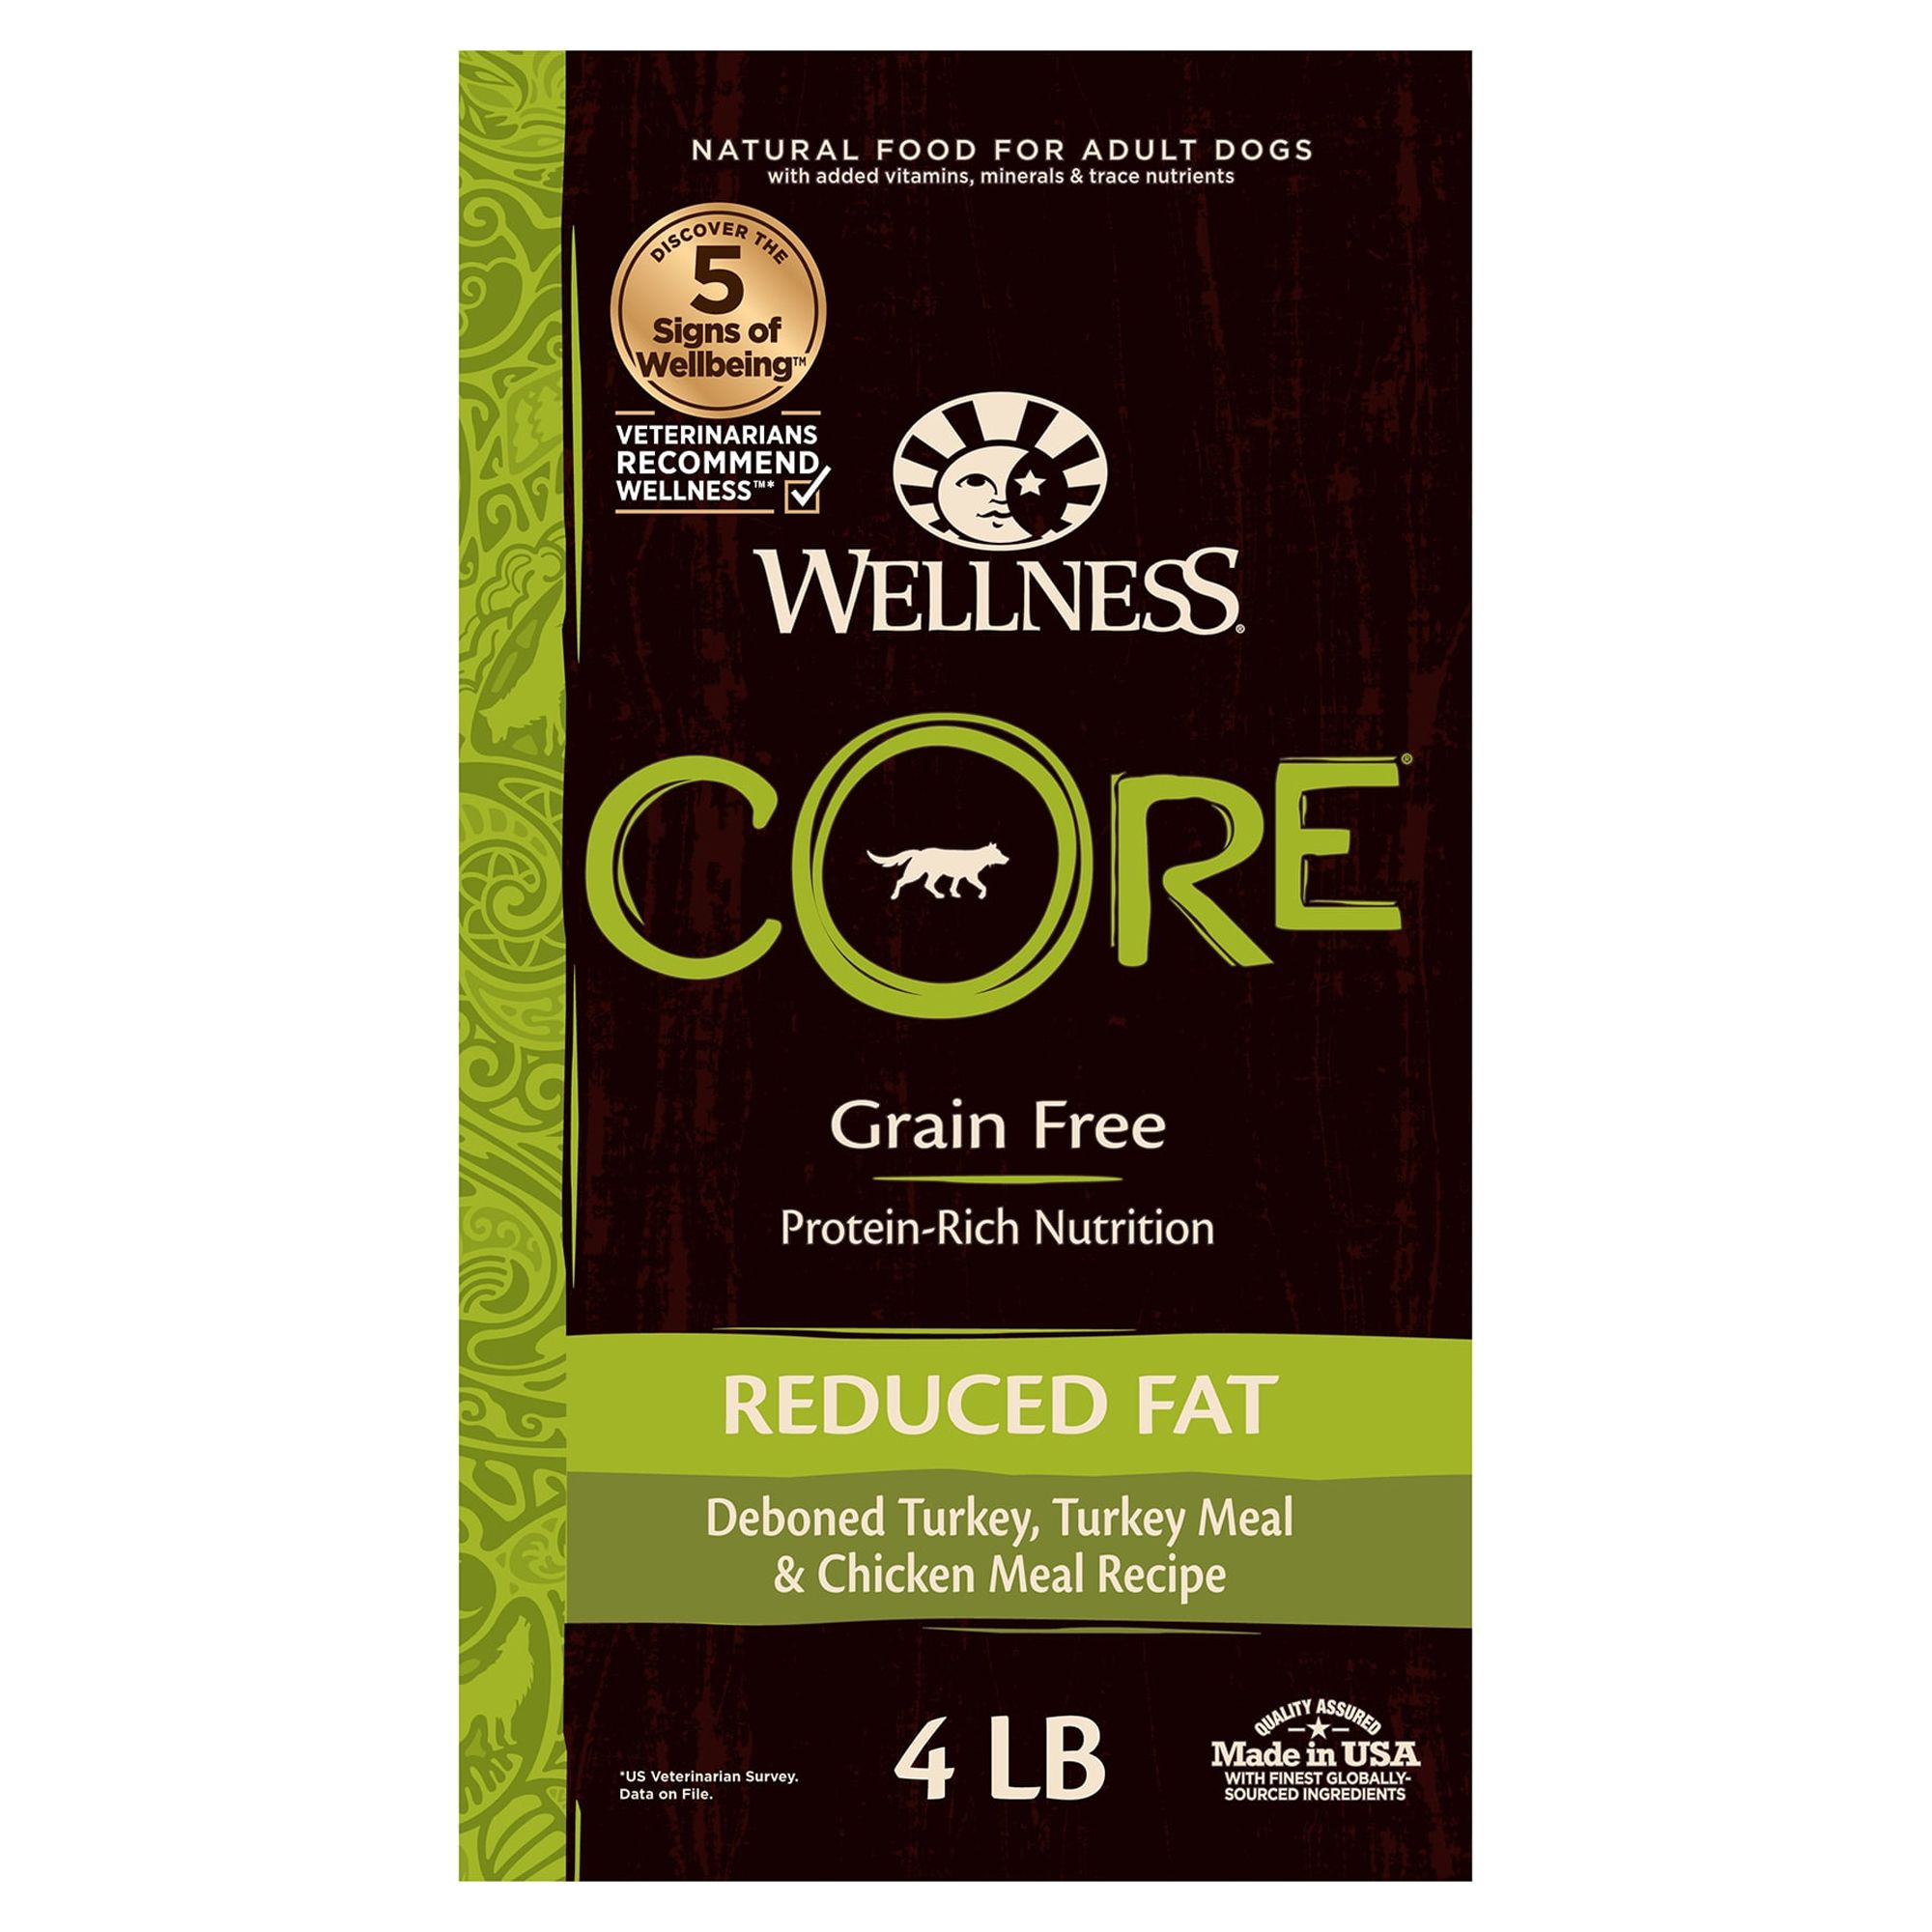 Wellness CORE Natural Grain Free Dry Dog Food, Reduced Fat Recipe, 4-Pound Bag - image 1 of 8